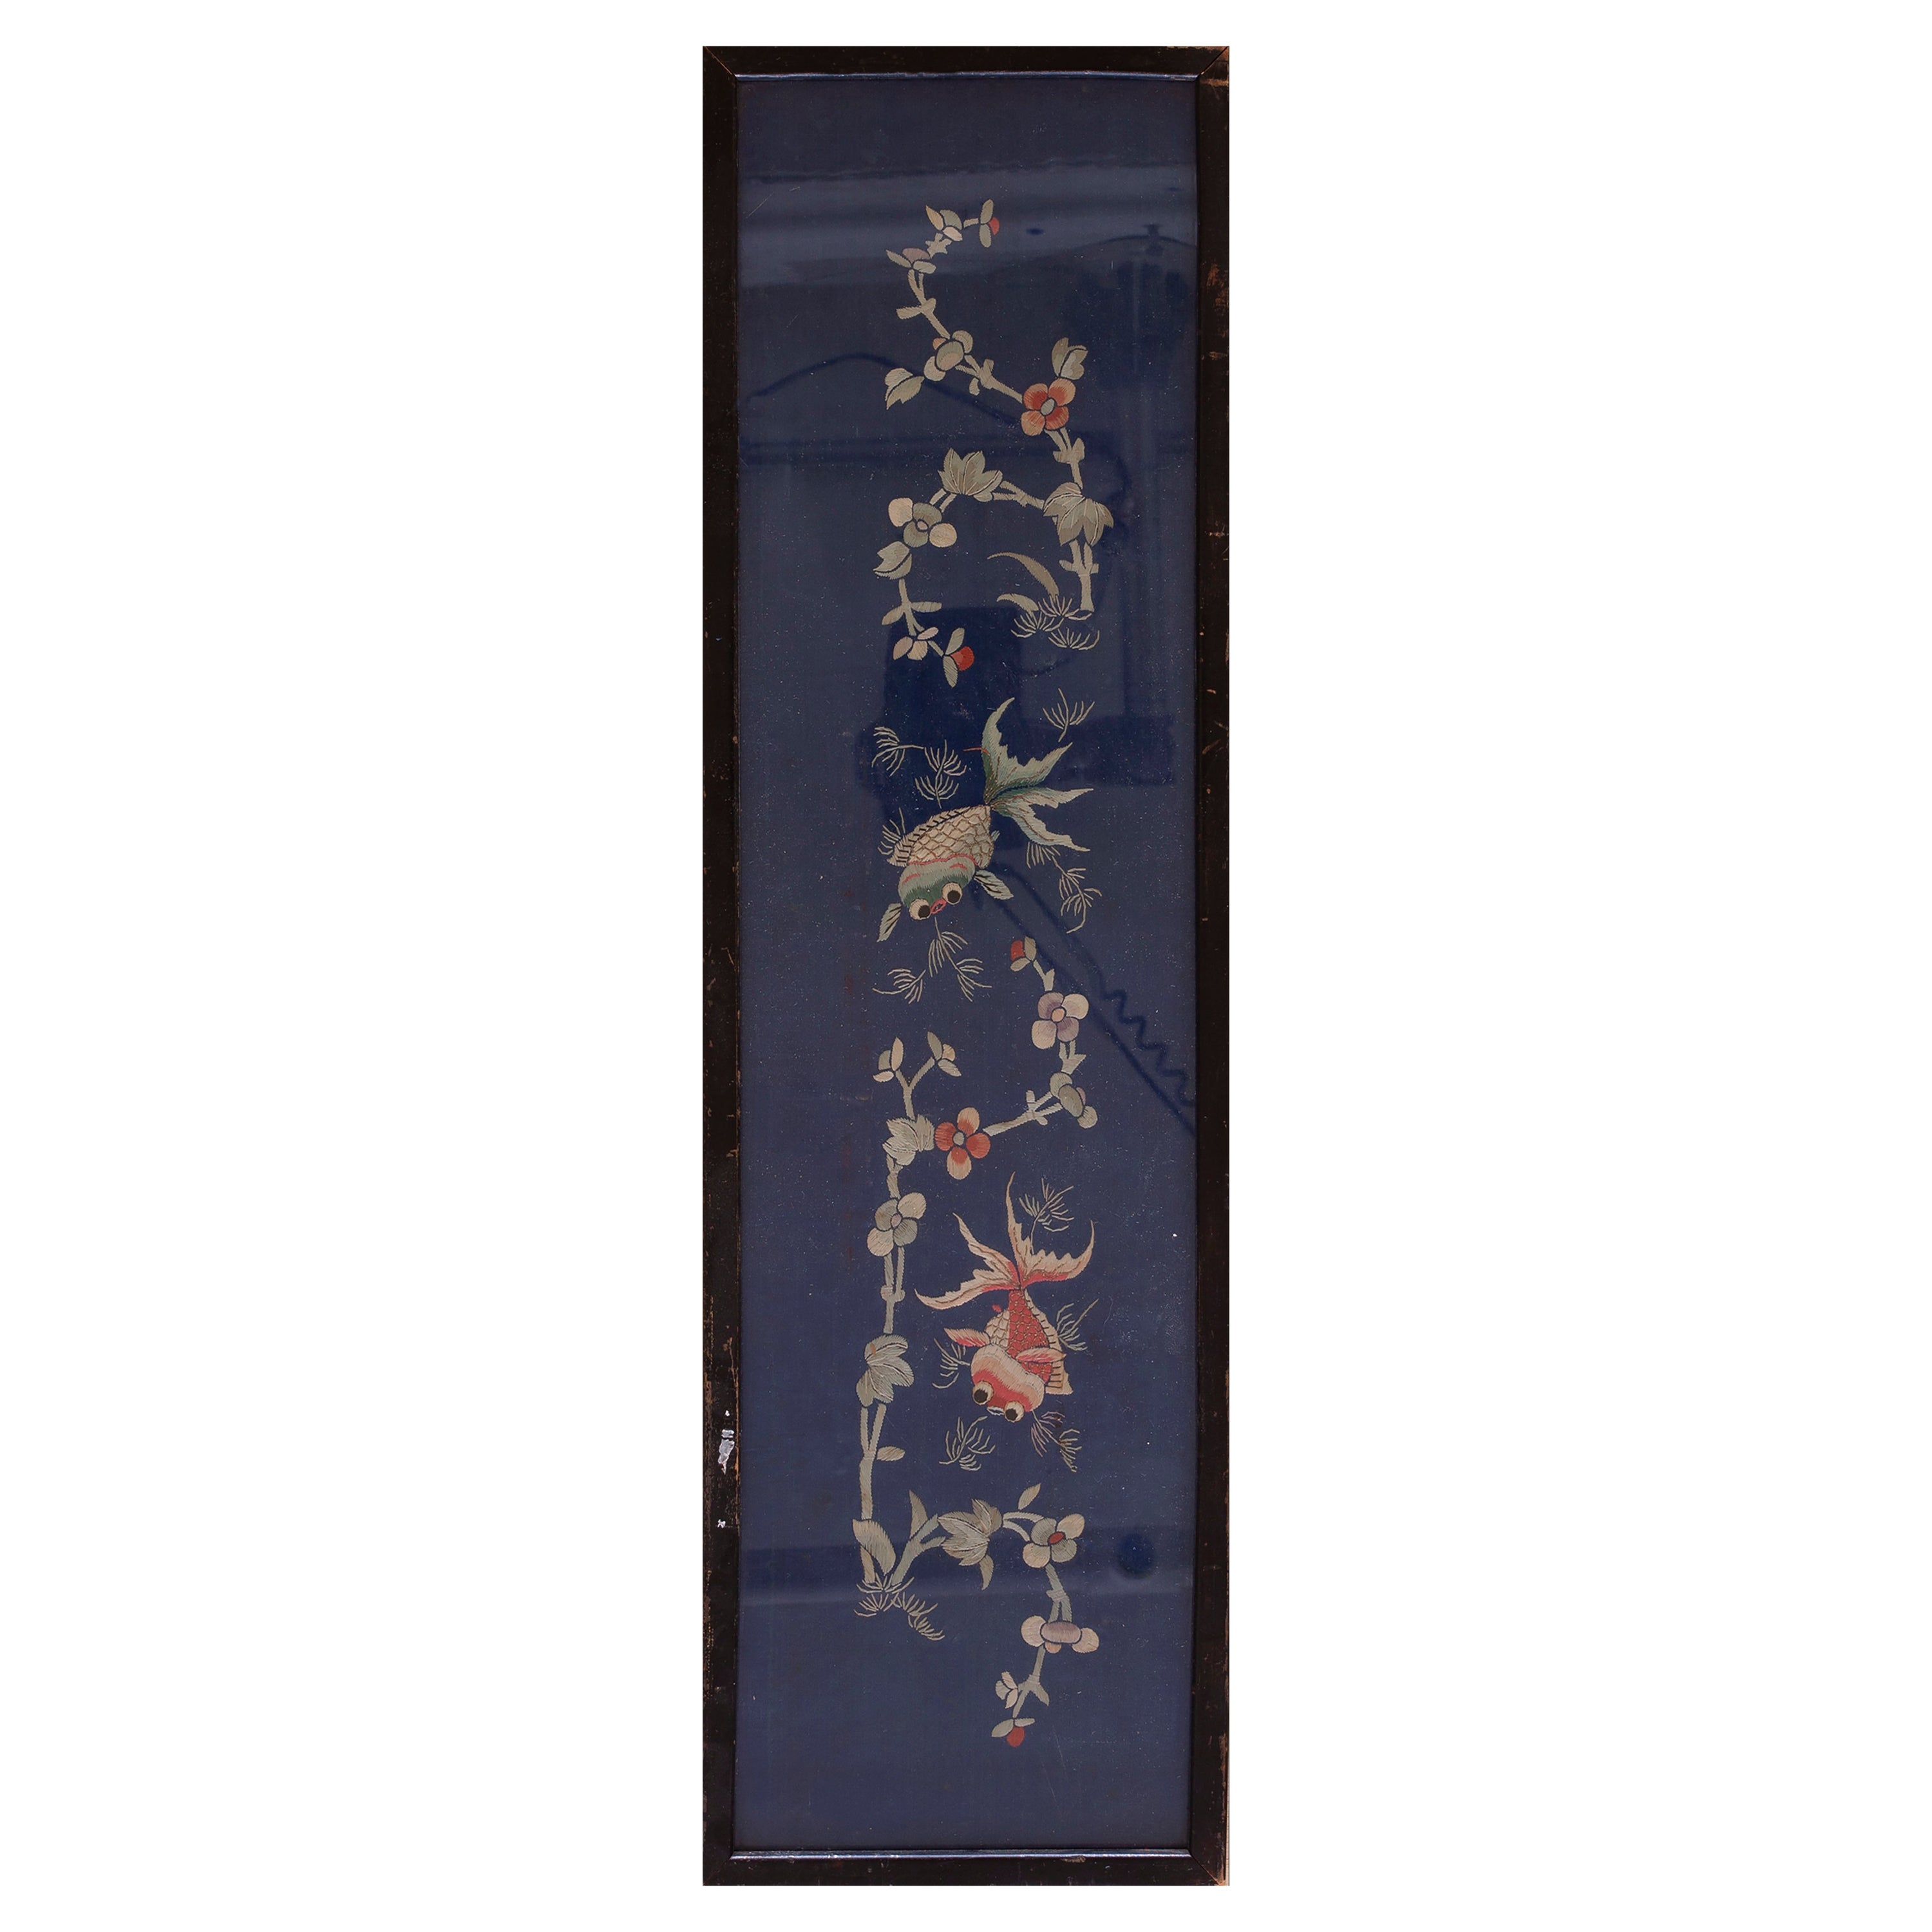 Antique Chinese Textile Farmed 0' 8''x 1' 10'' For Sale